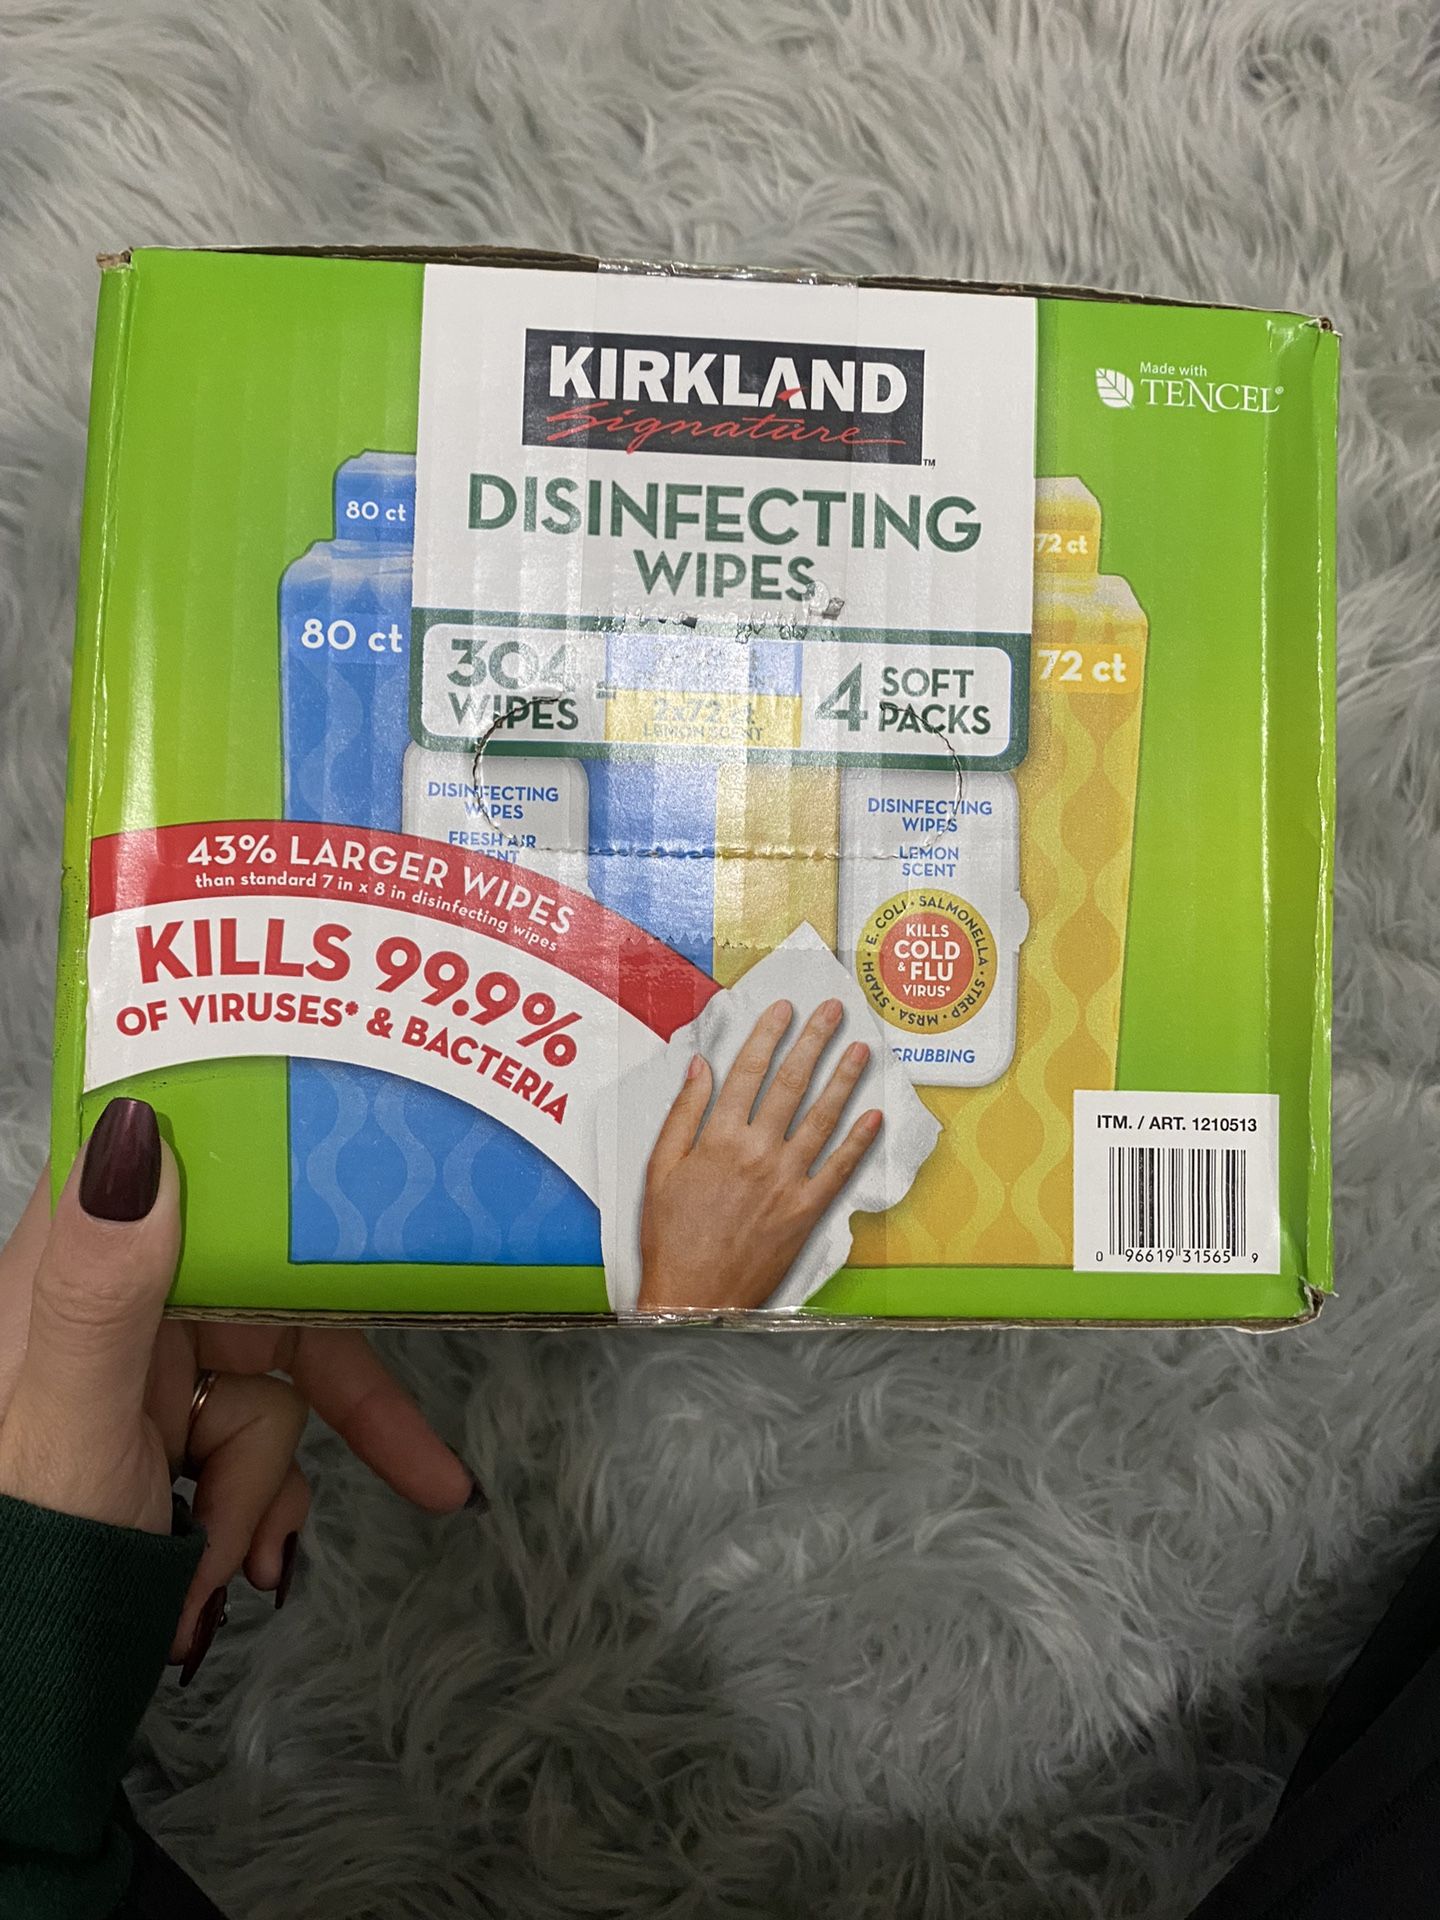 Kirkland Disinfecting Wipes 4 Soft Packets